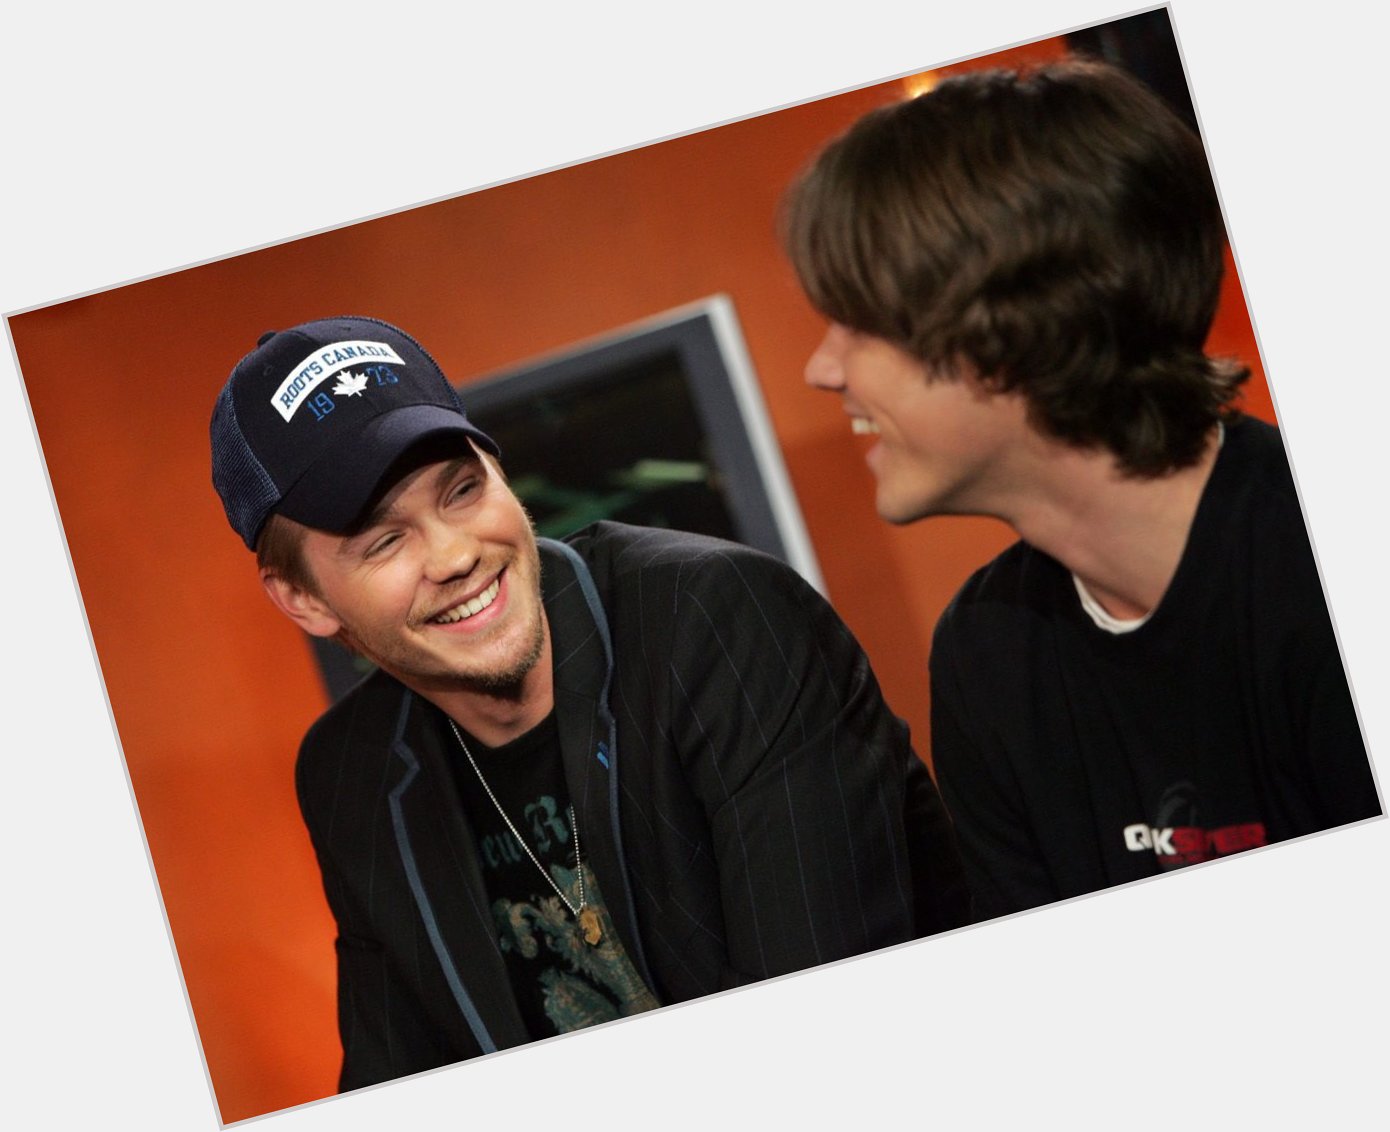 Happy birthday Chad Michael Murray! I hope one day we get to see Chad and Jared working together again!  